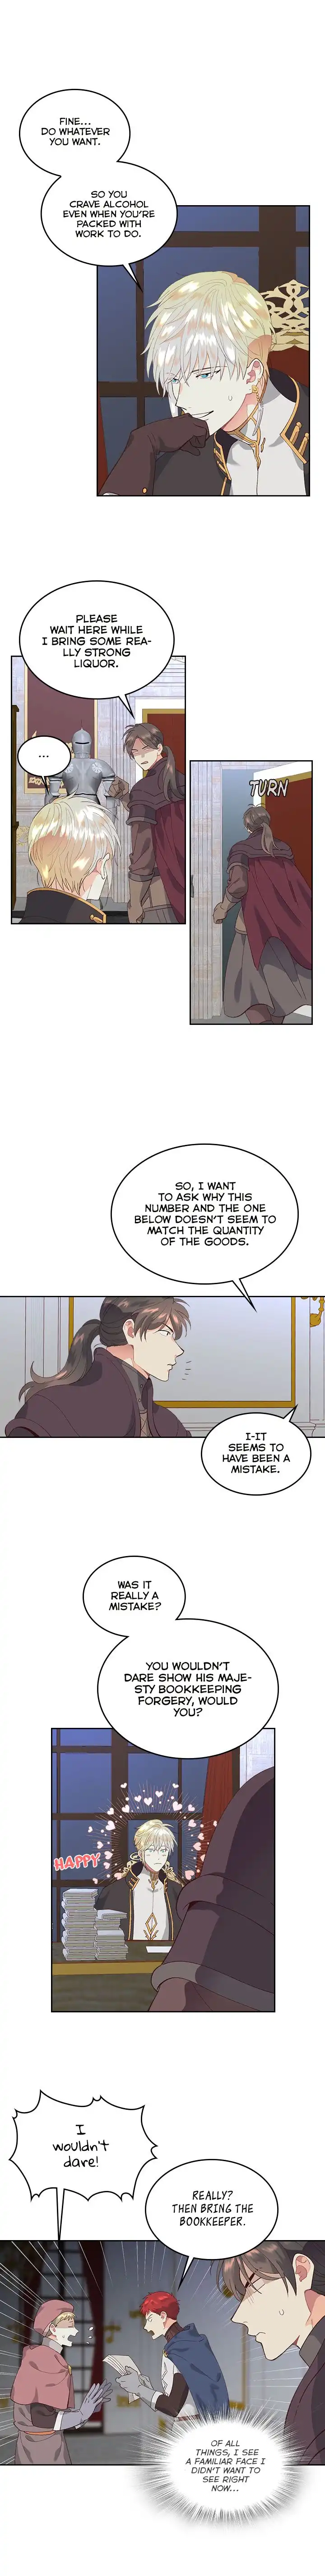 Emperor And The Female Knight Chapter 45